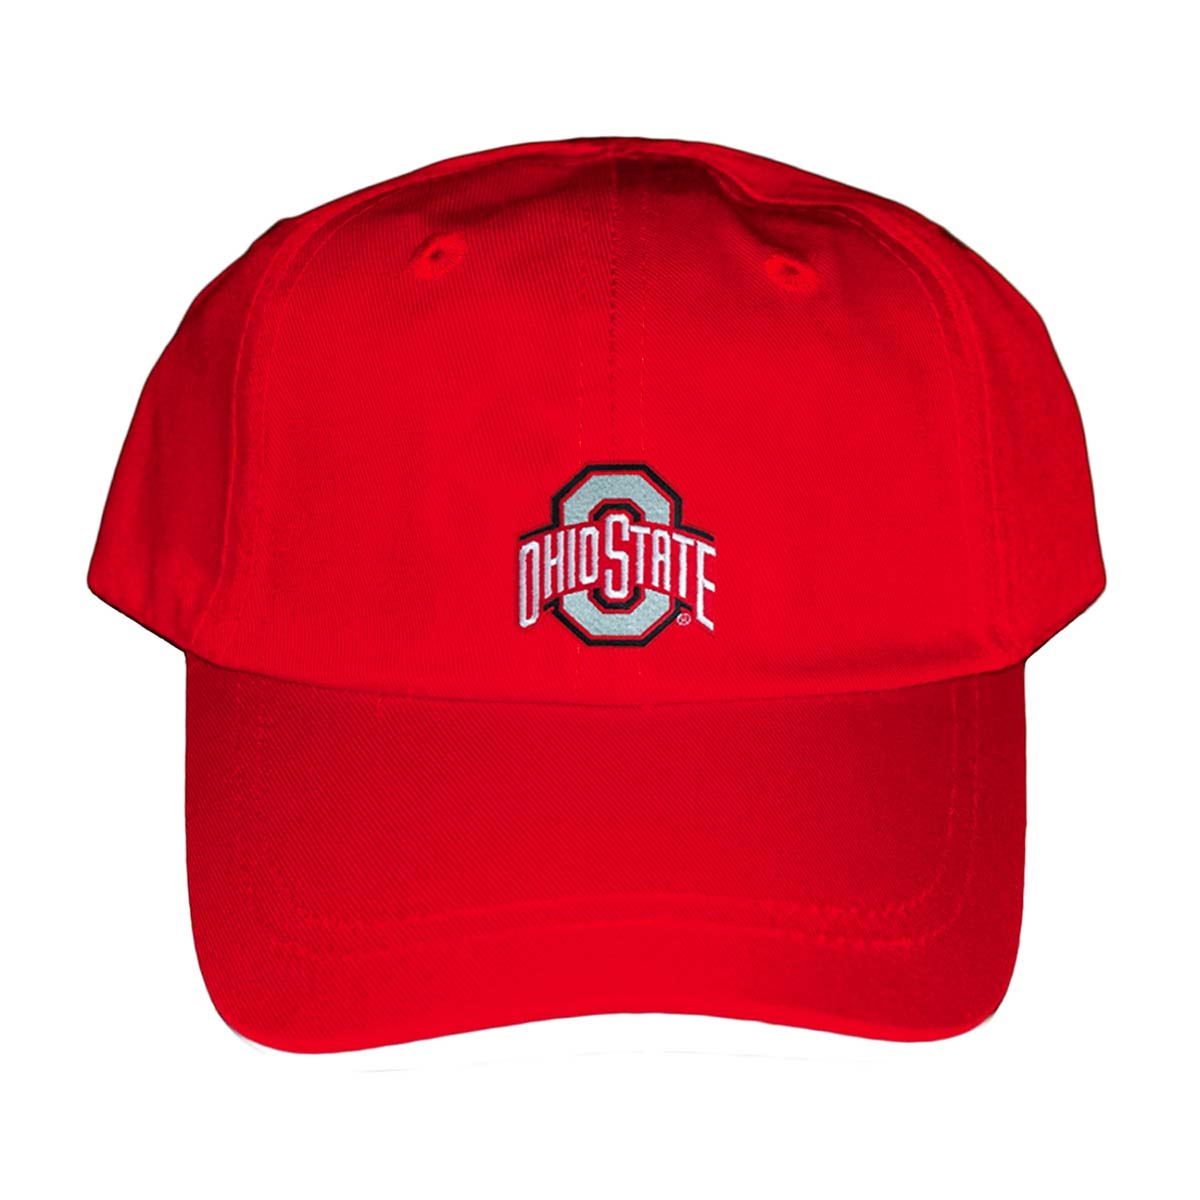 OHIO STATE RED INFANT BALL CAP